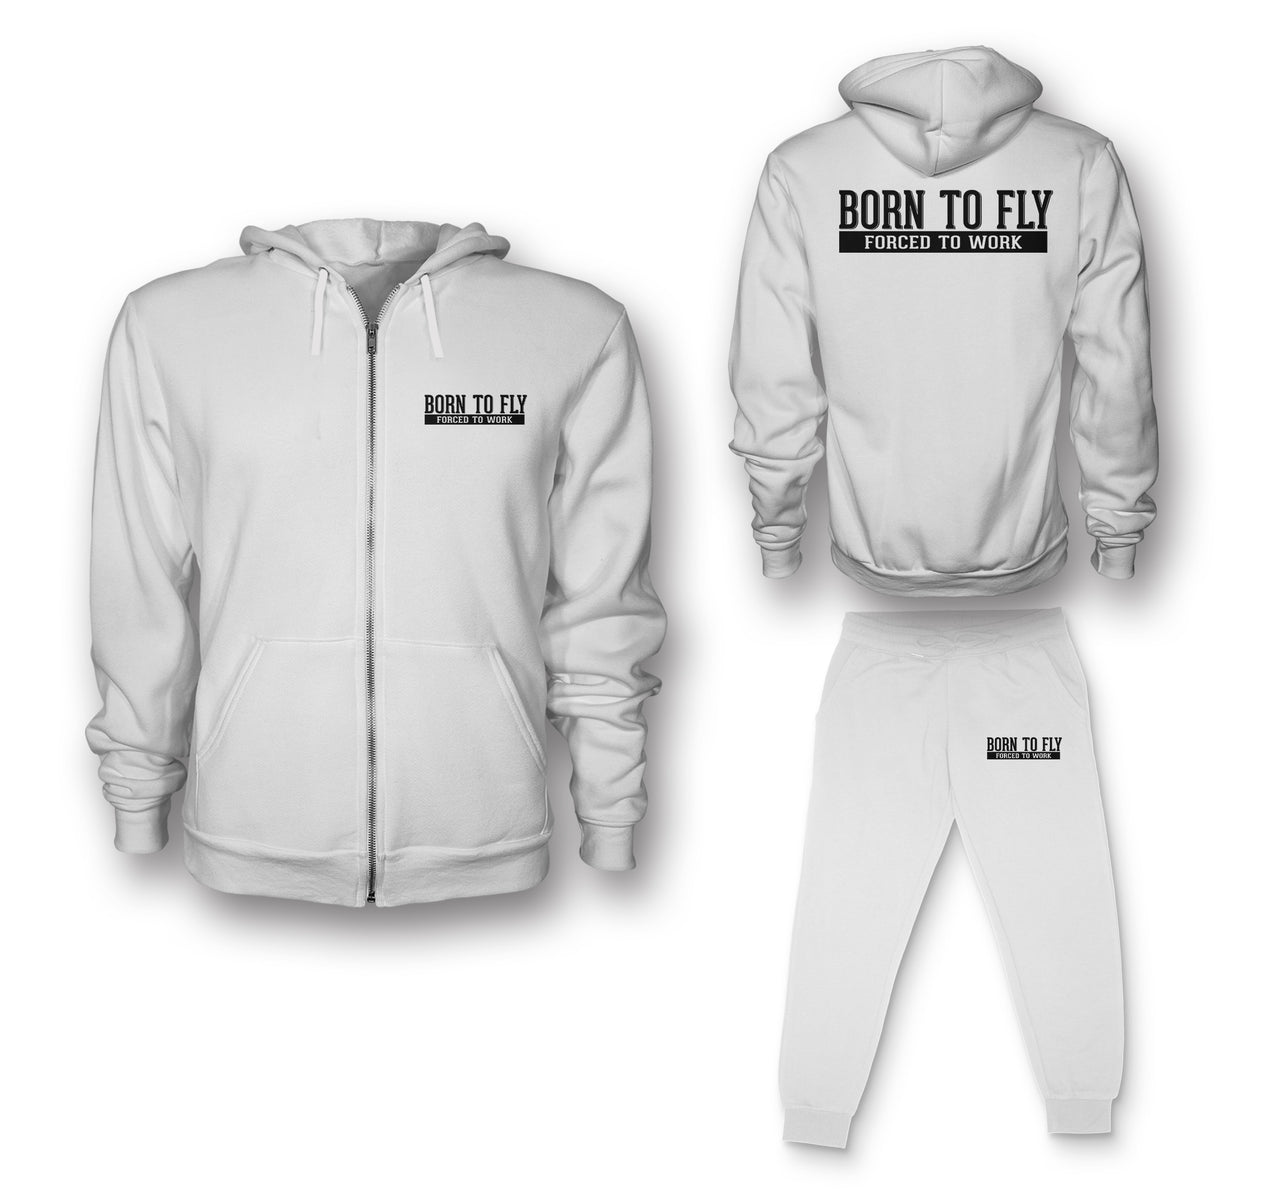 Born To Fly Forced To Work Designed Zipped Hoodies & Sweatpants Set